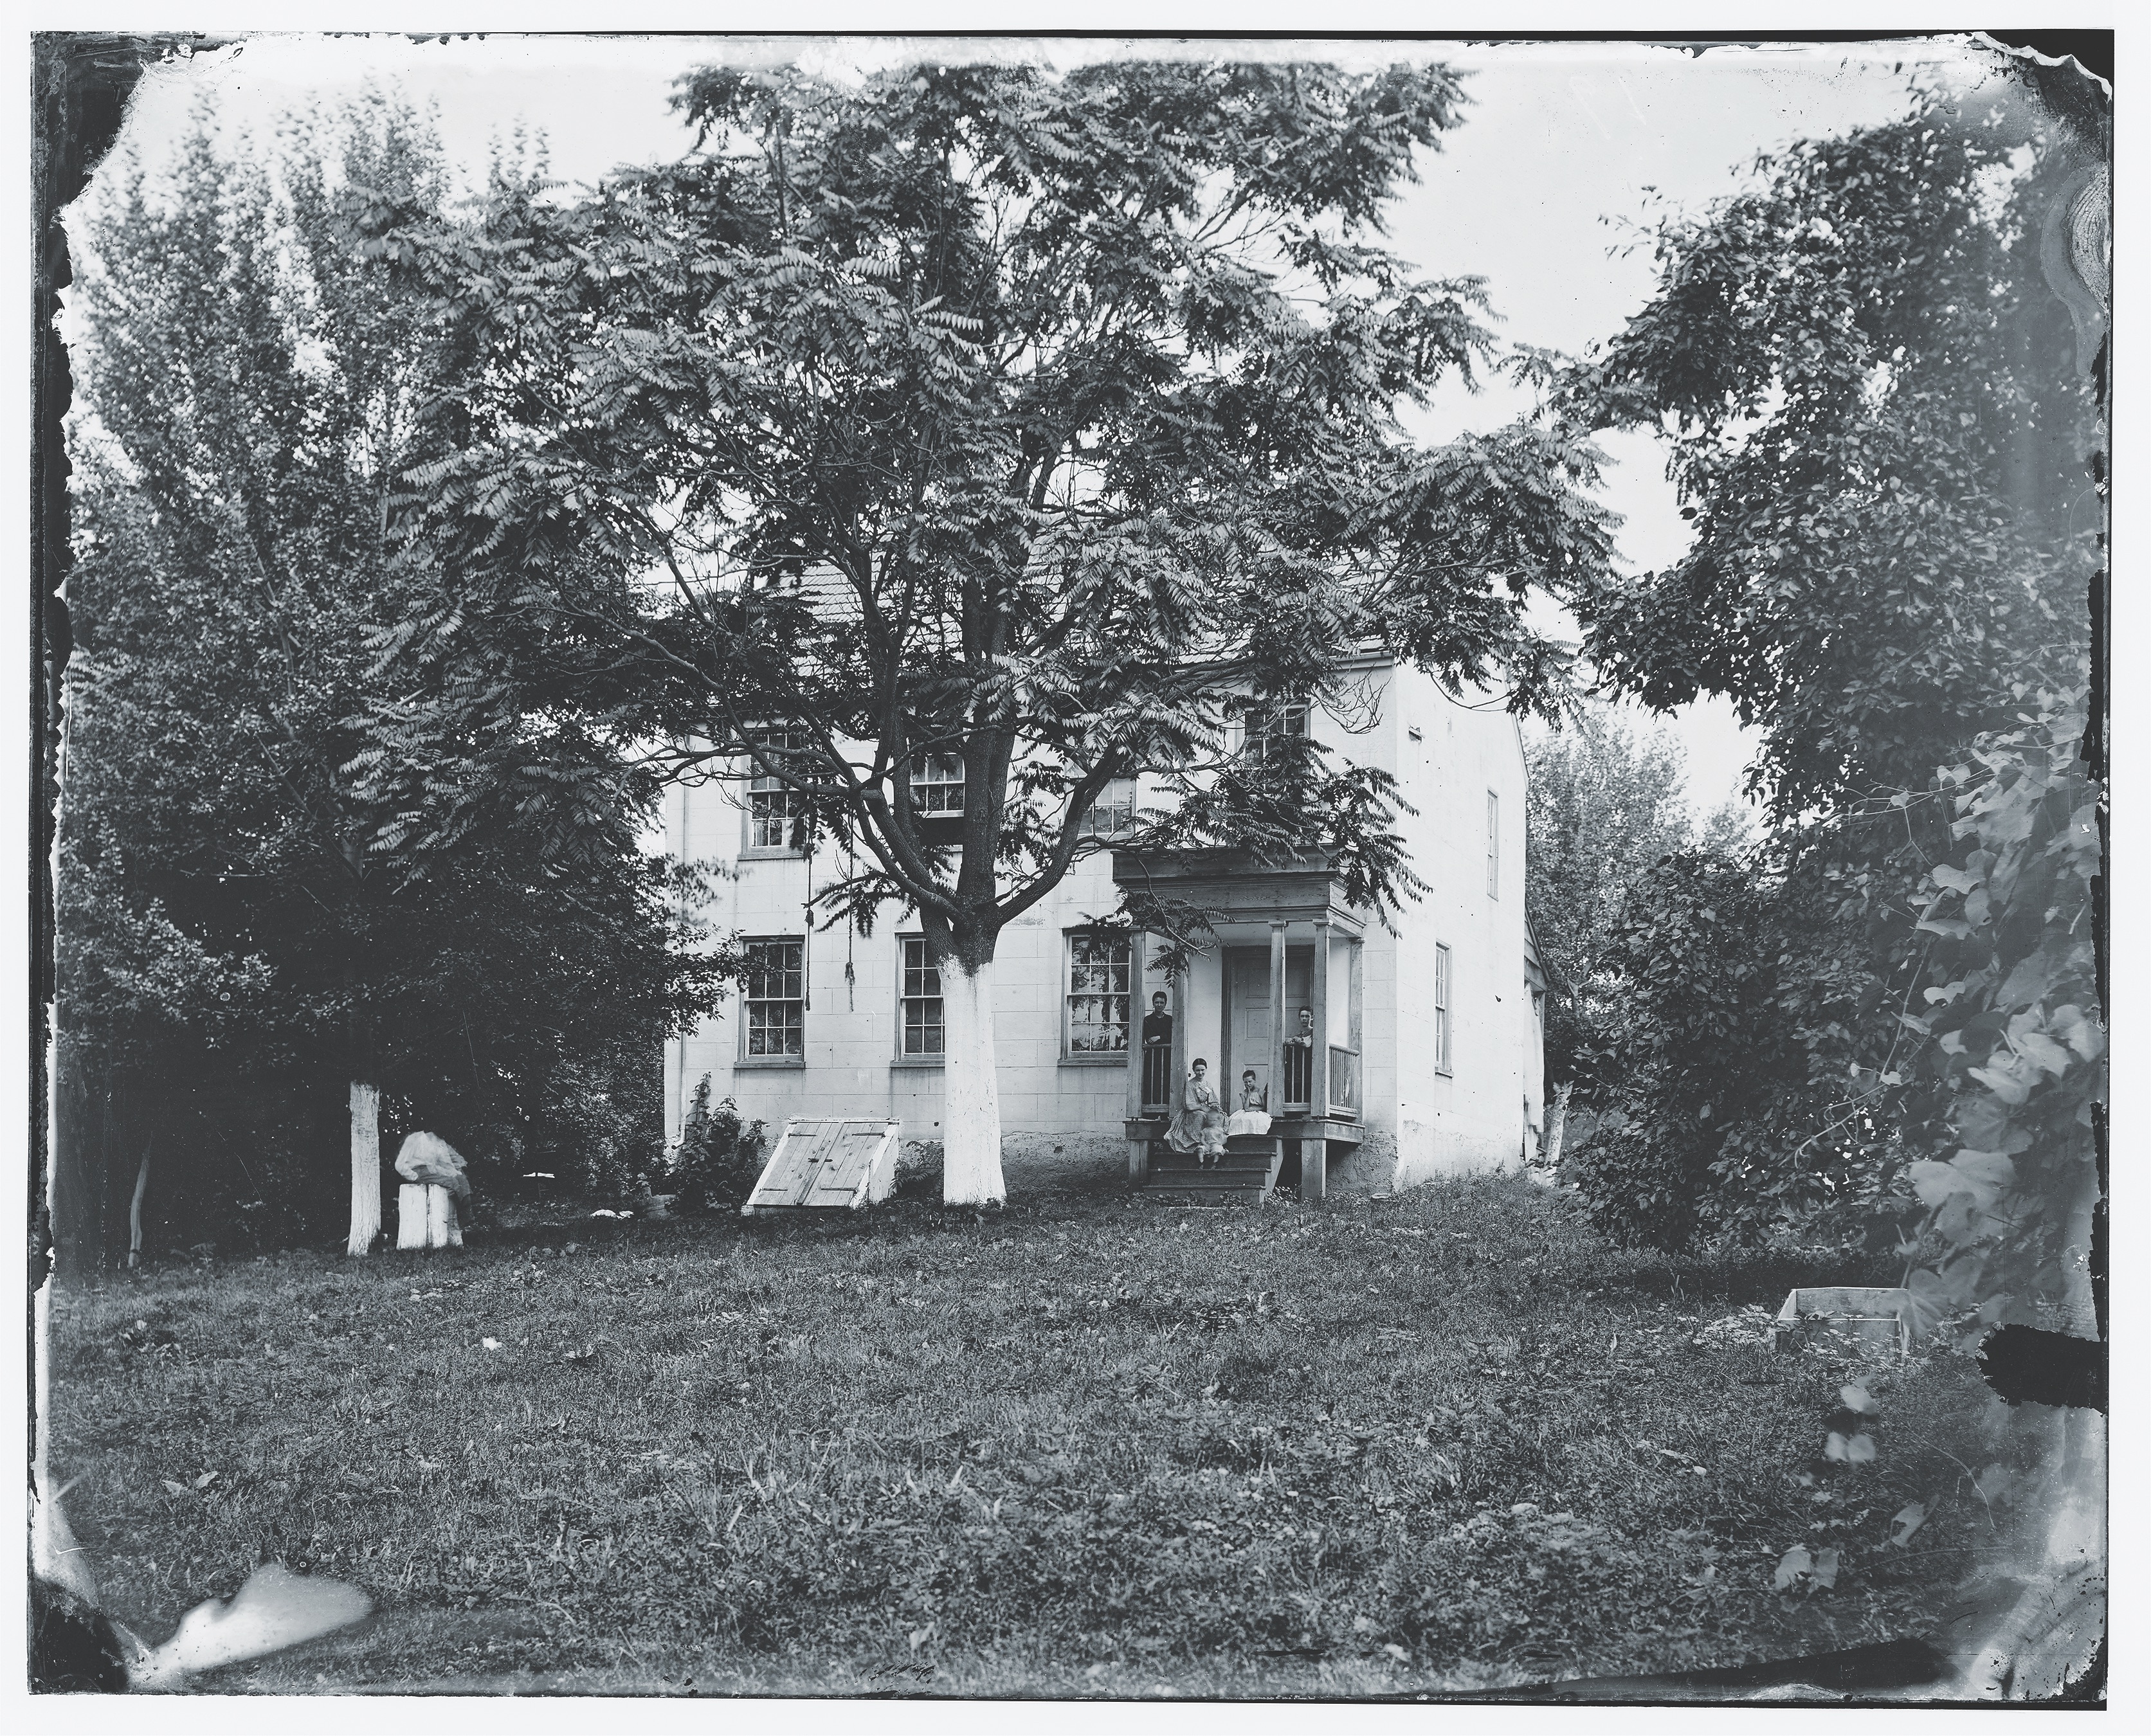 David R. Miller’s handsome home, seen in this wartime image, stood north of his cornfield. After the battle, Miller submitted a damage claim to the federal government for $1,237, and was awarded $995 in 1872. His brother, Daniel, died of disease contracted from exposure to sick soldiers. (Library of Congress)